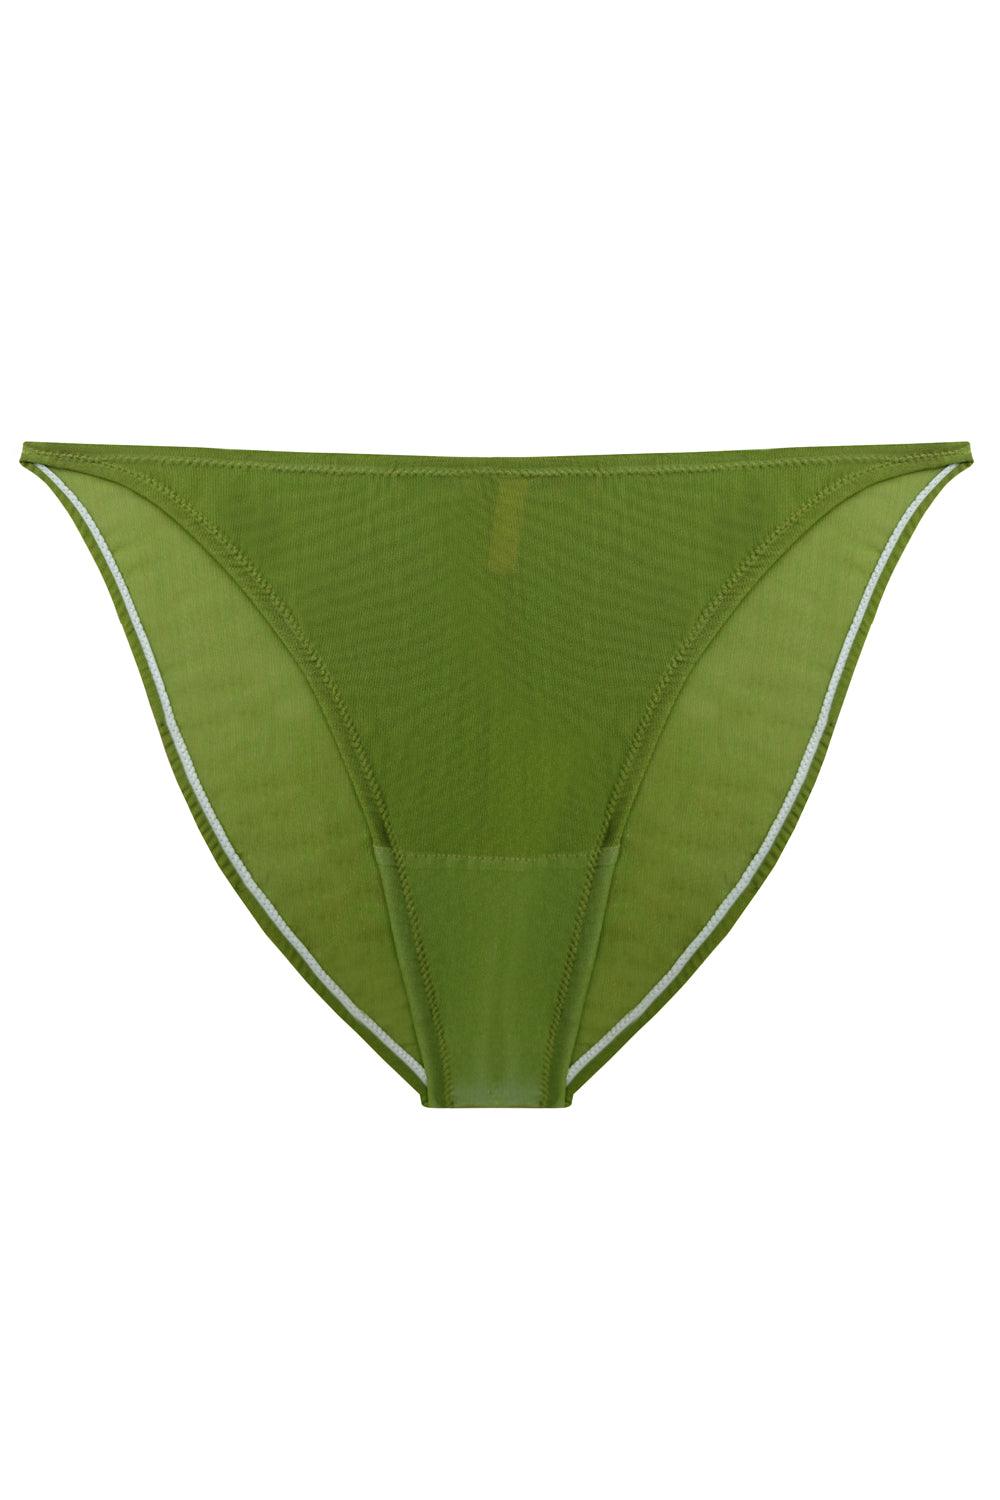 Constance Greenery high-waisted panties - Slip panties by More! Keòsme. Shop on yesUndress